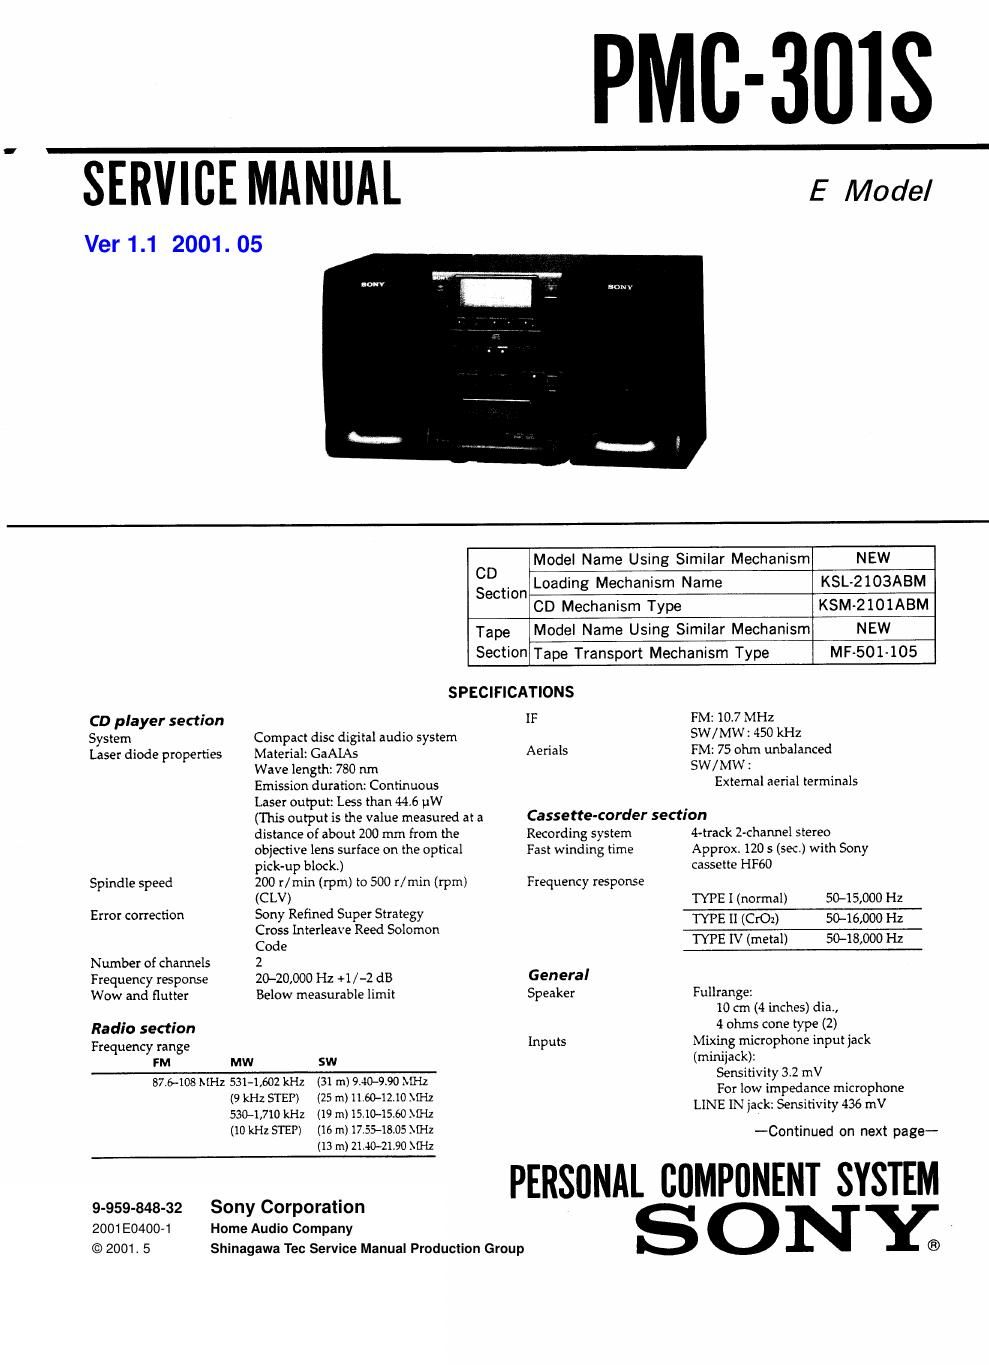 sony pmc 301 s service manual